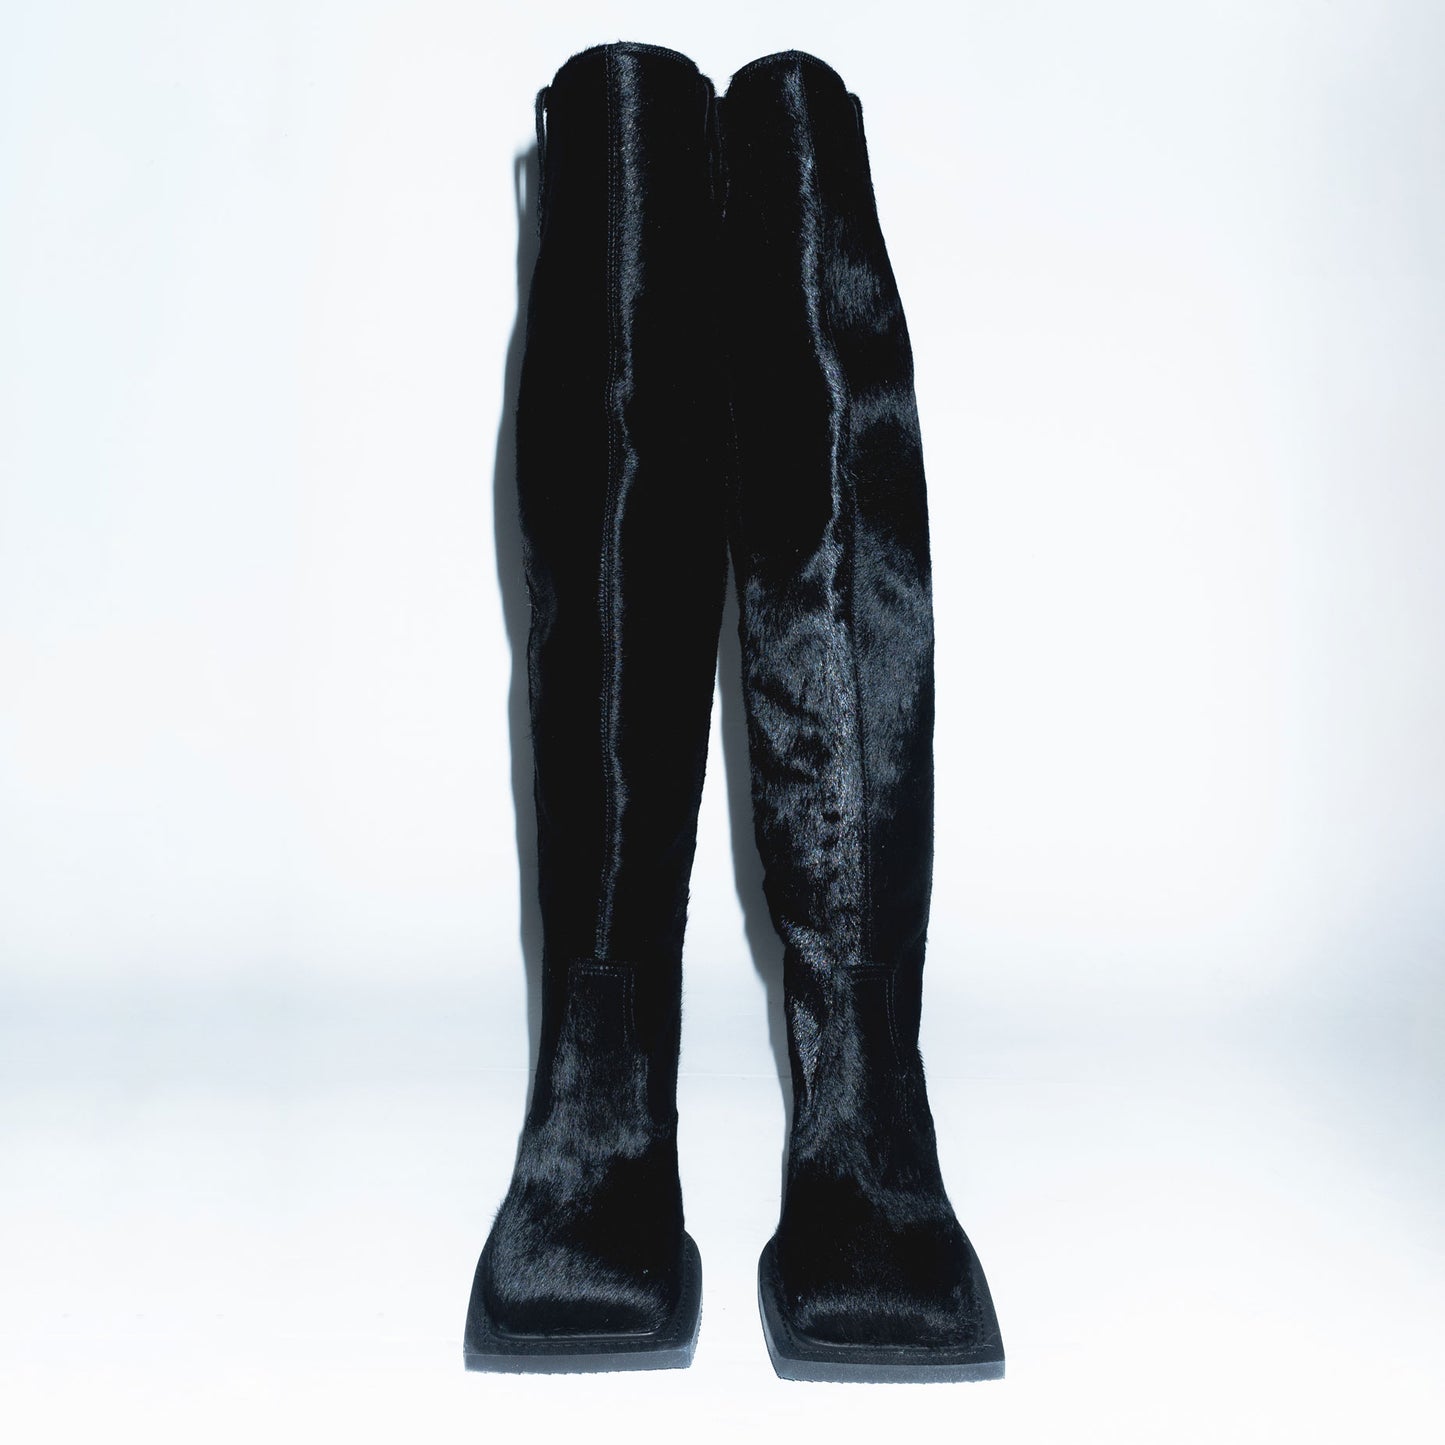 Runway Howling Knee High Boots in Cow Hair Black